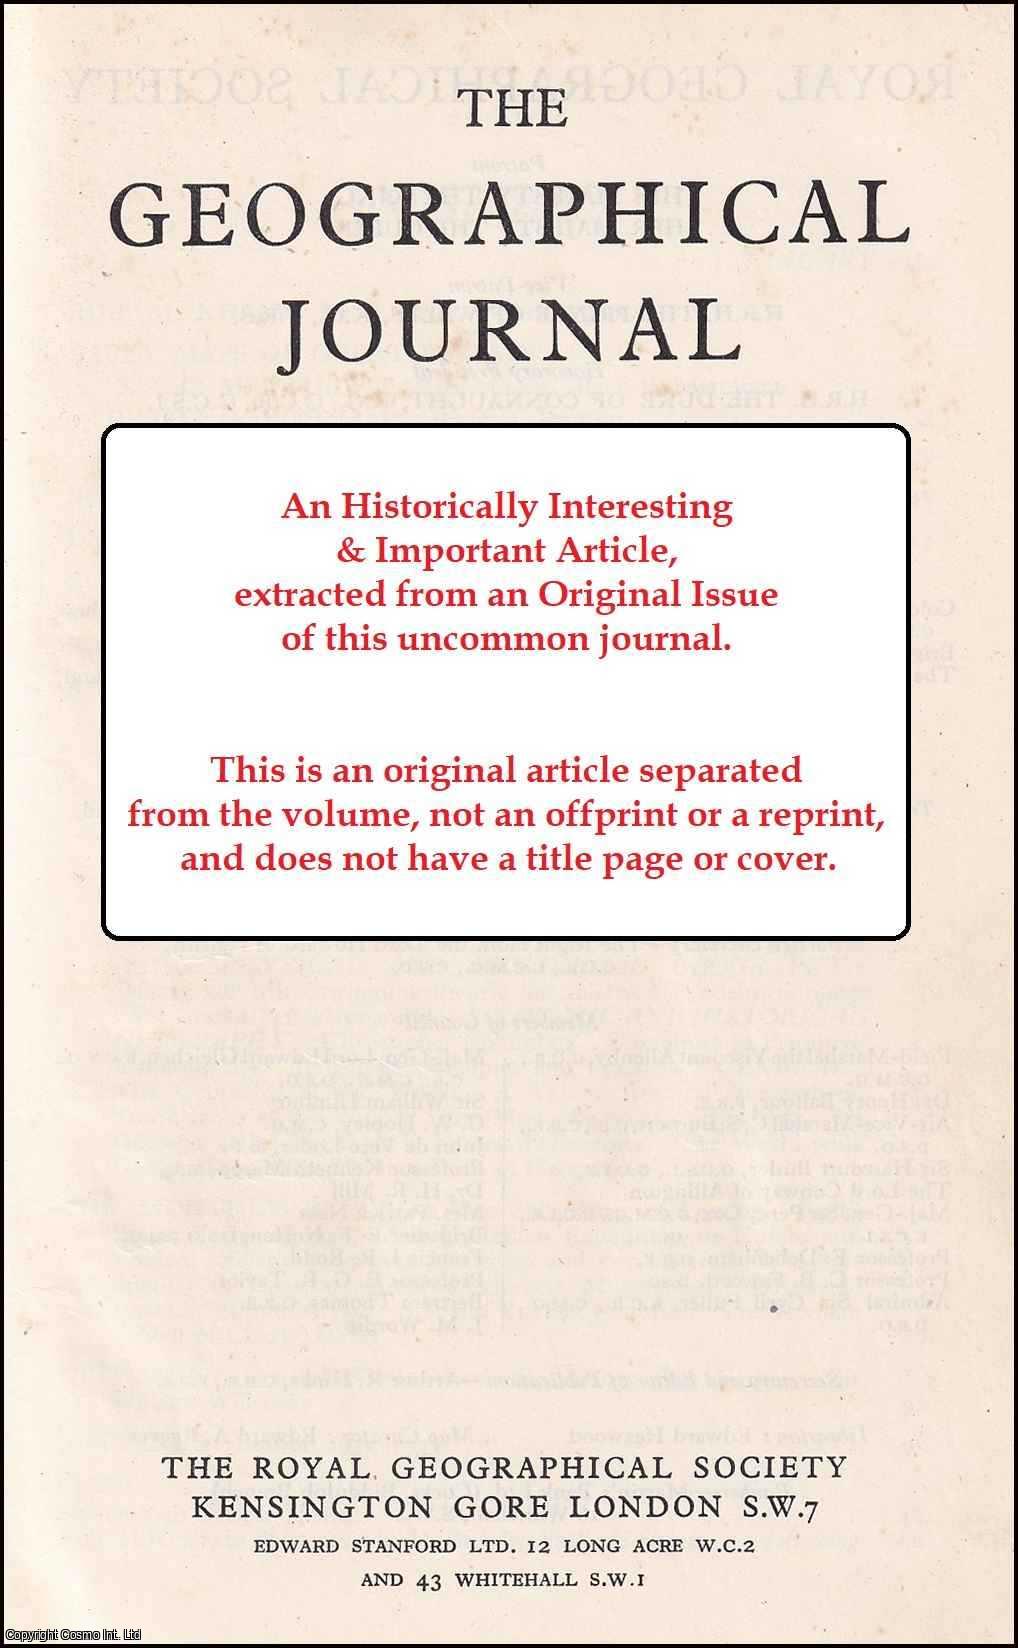 J. N. Blashford-Snell - Conquest of The Blue Nile. An original article from the Geographical Journal, 1970.